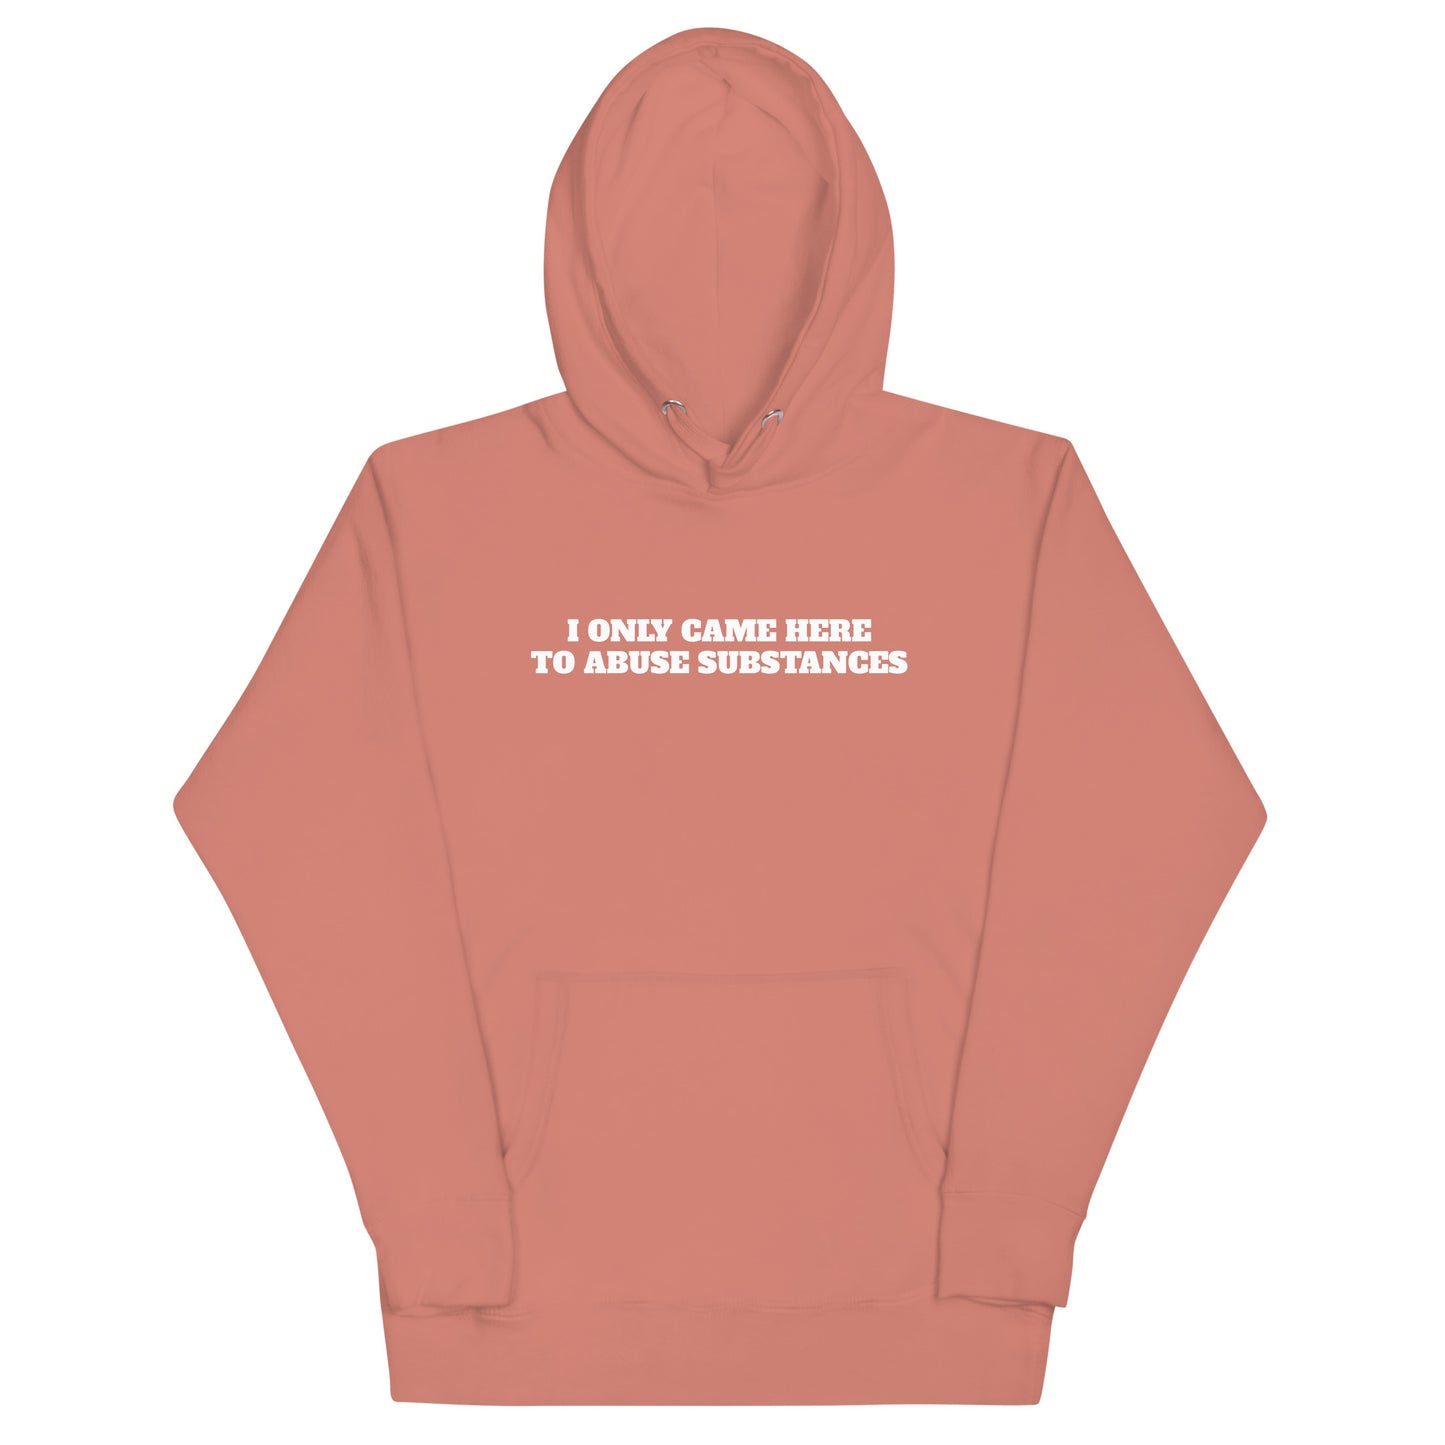 Substance Abuse Hoodie